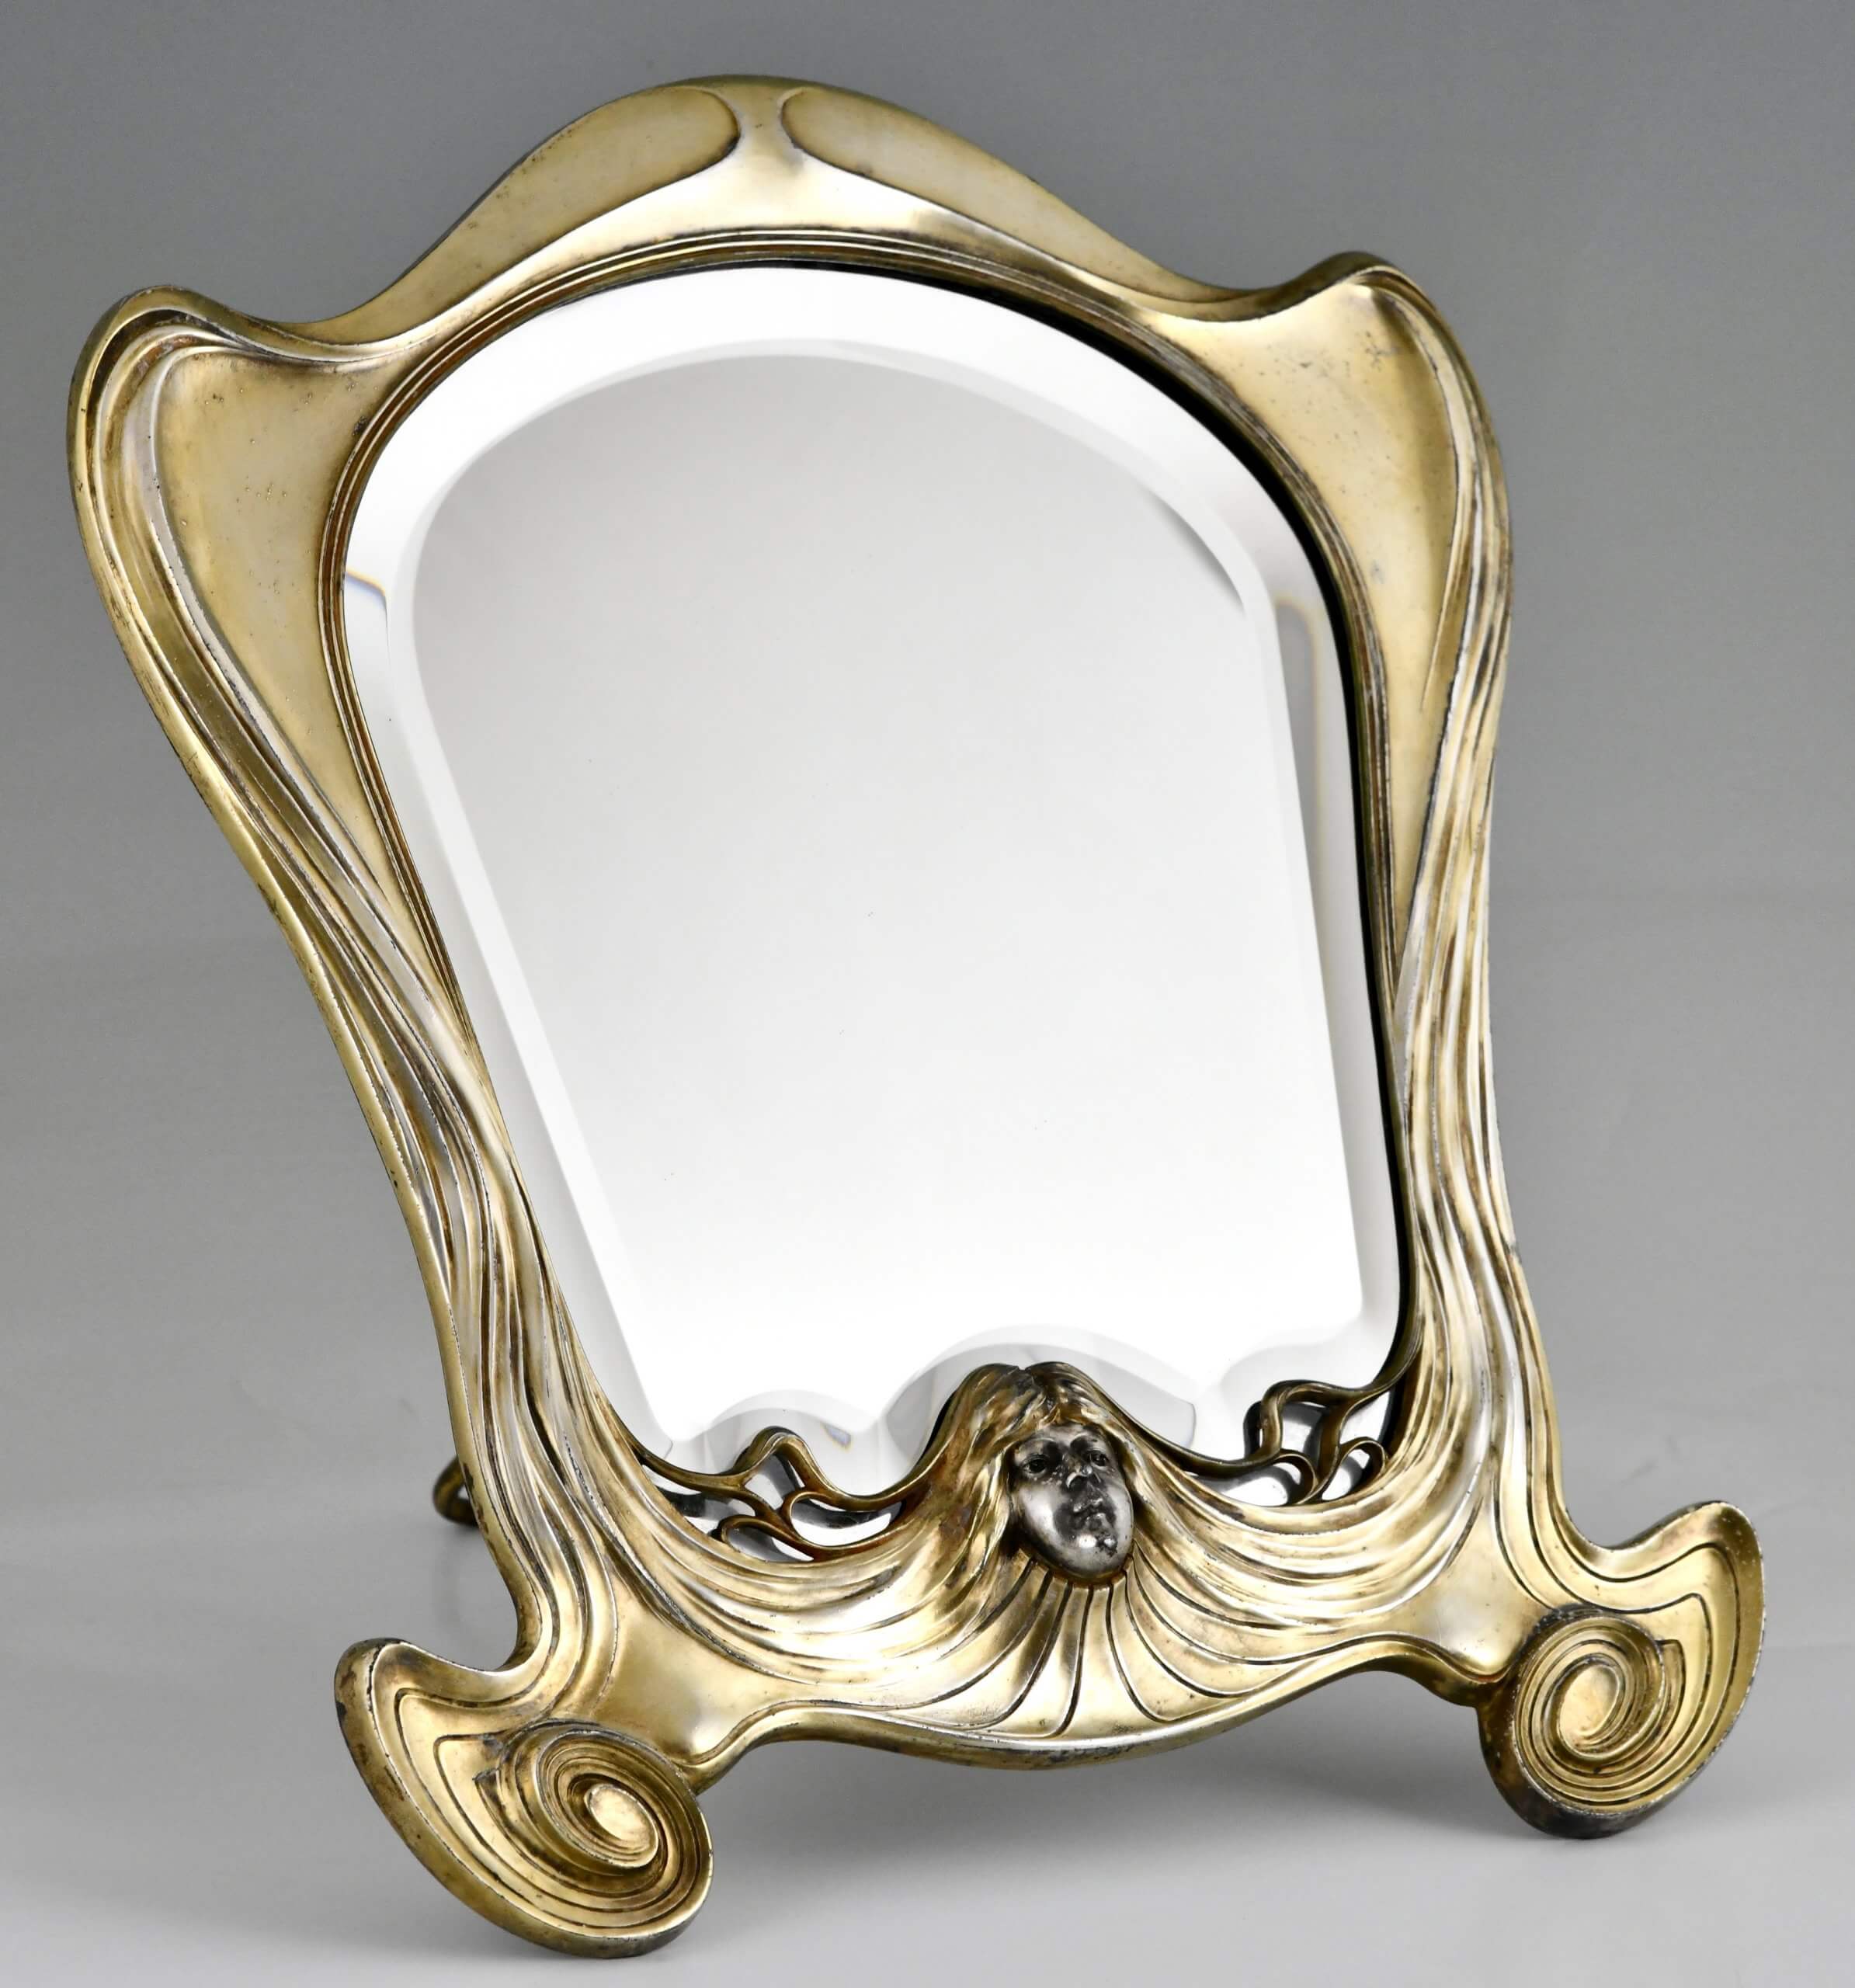 Art Nouveau mirror with face of a woman